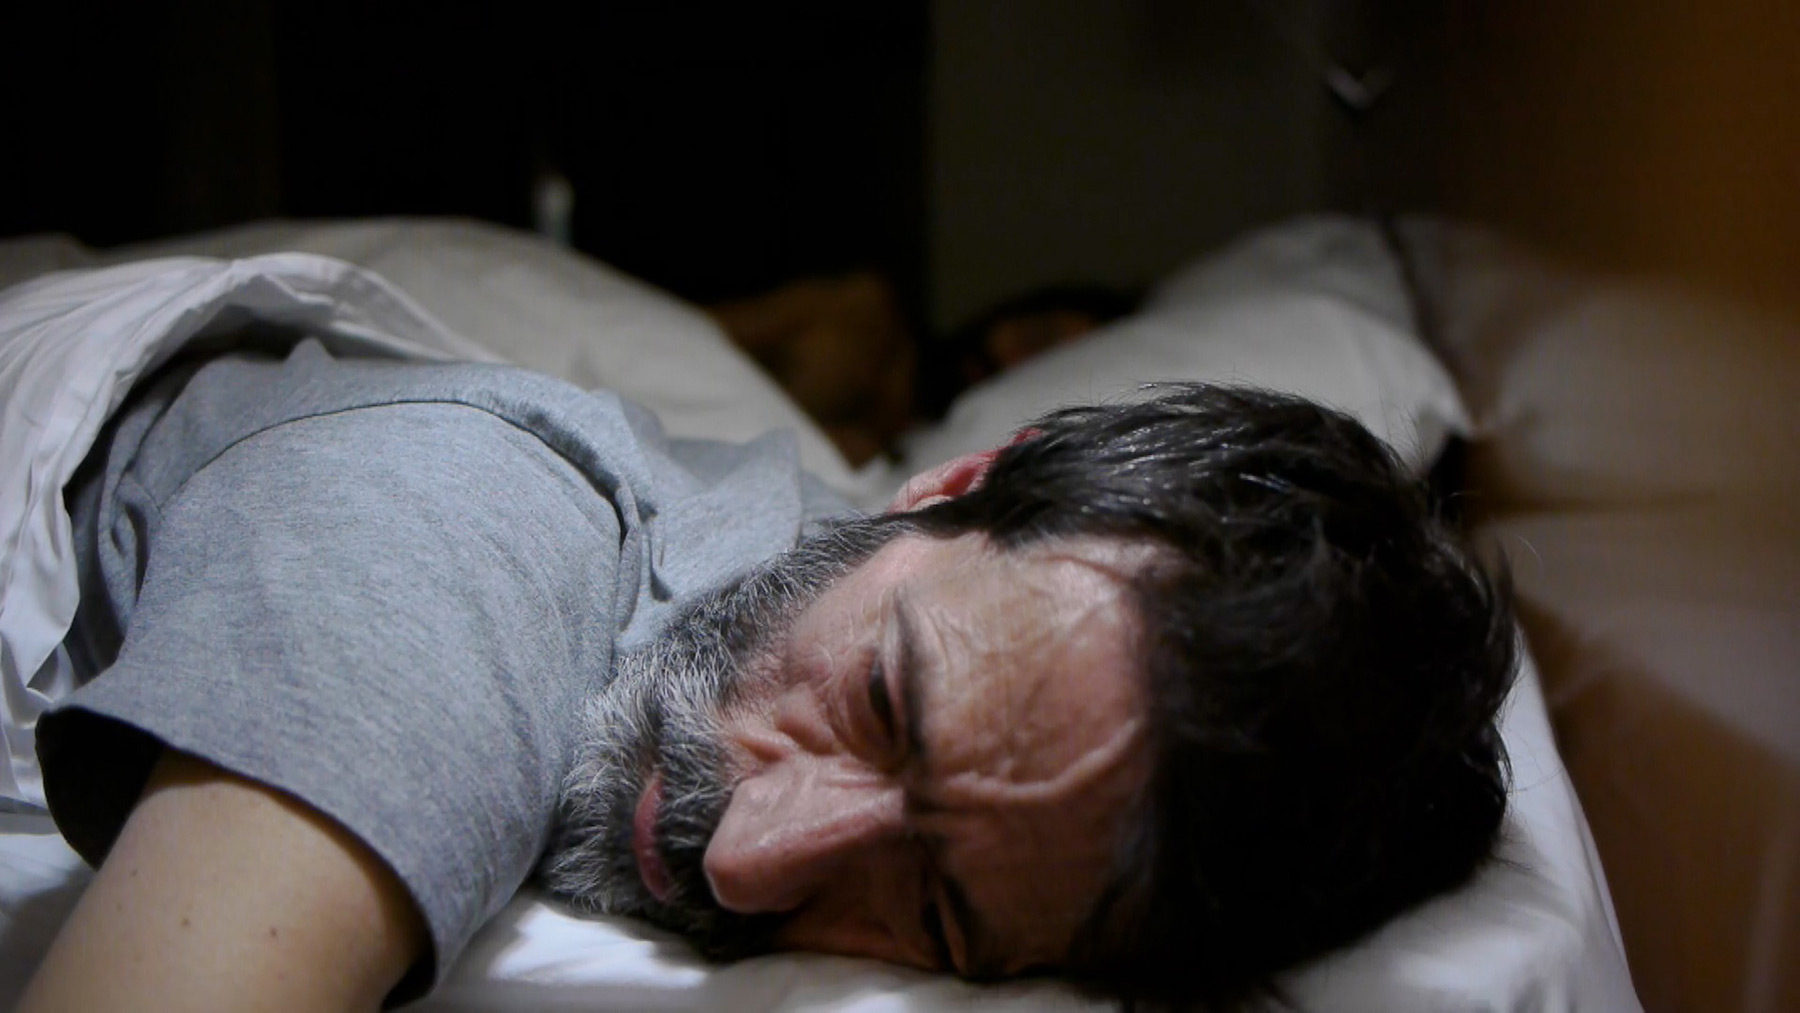 A bearded man lying on his stomach in bed appearing distressed